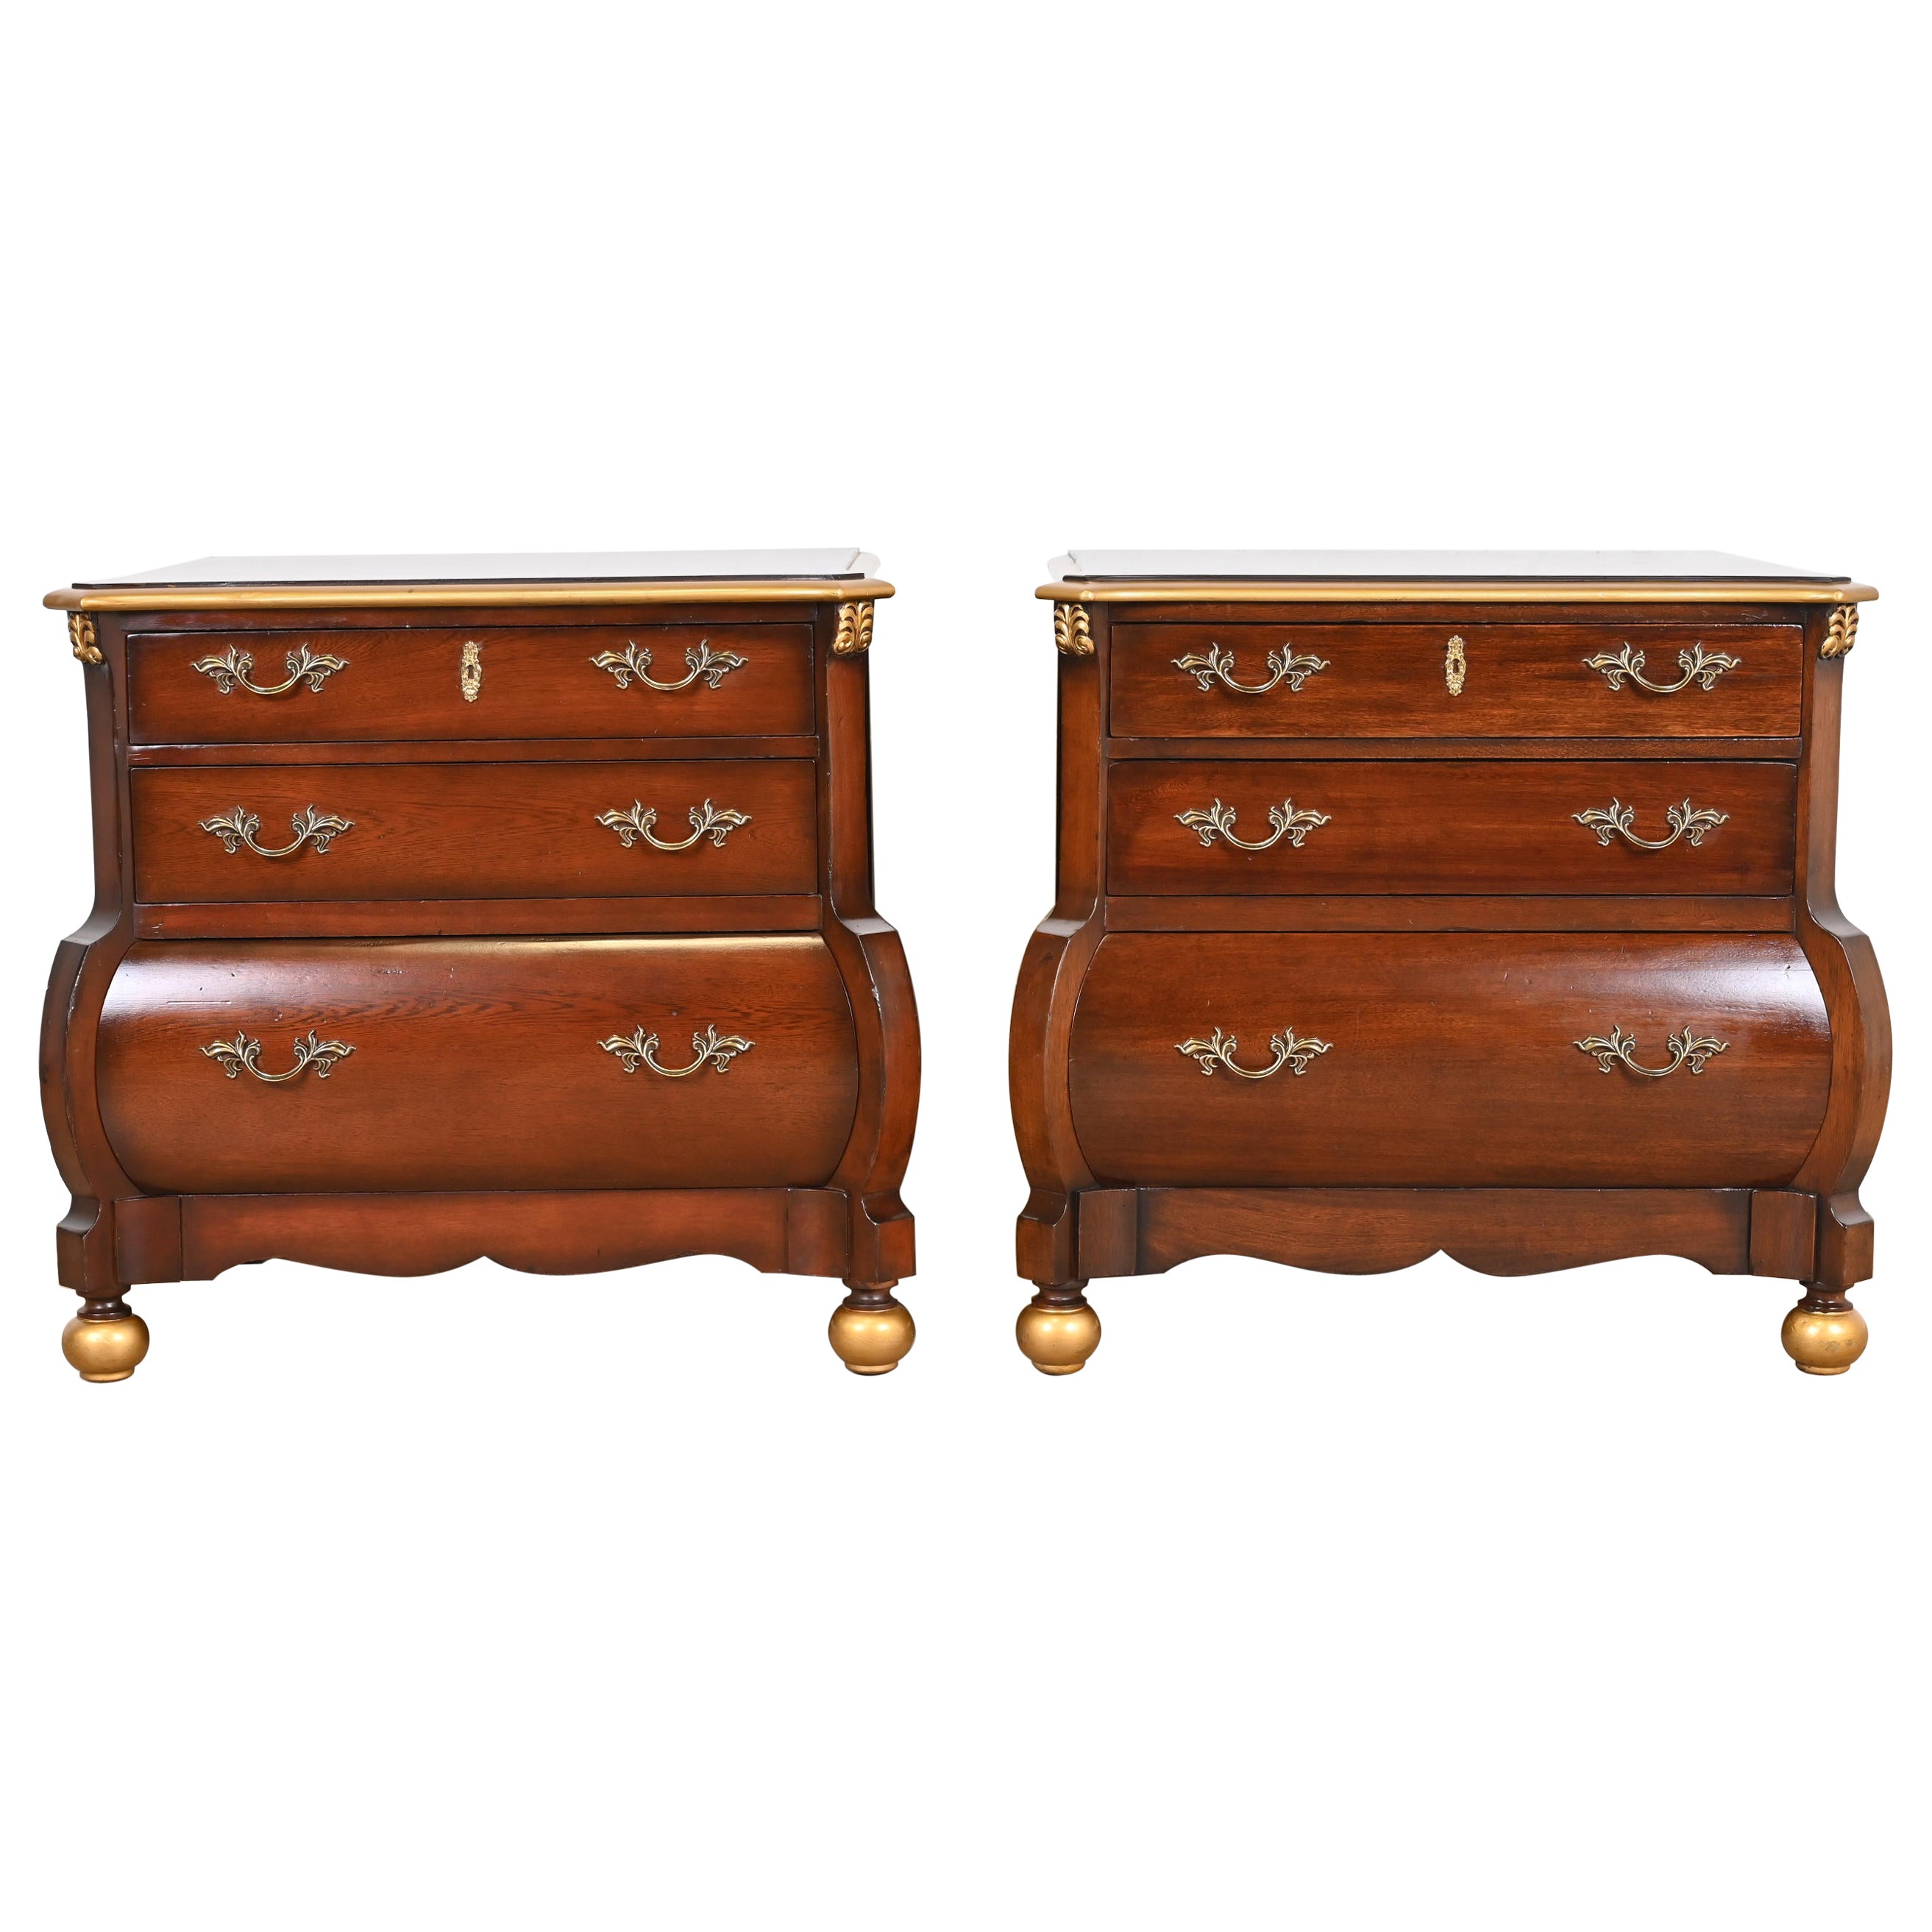 Ralph Lauren Italian Louis XV Mahogany Bombay Form Bedside Chests, Pair For Sale